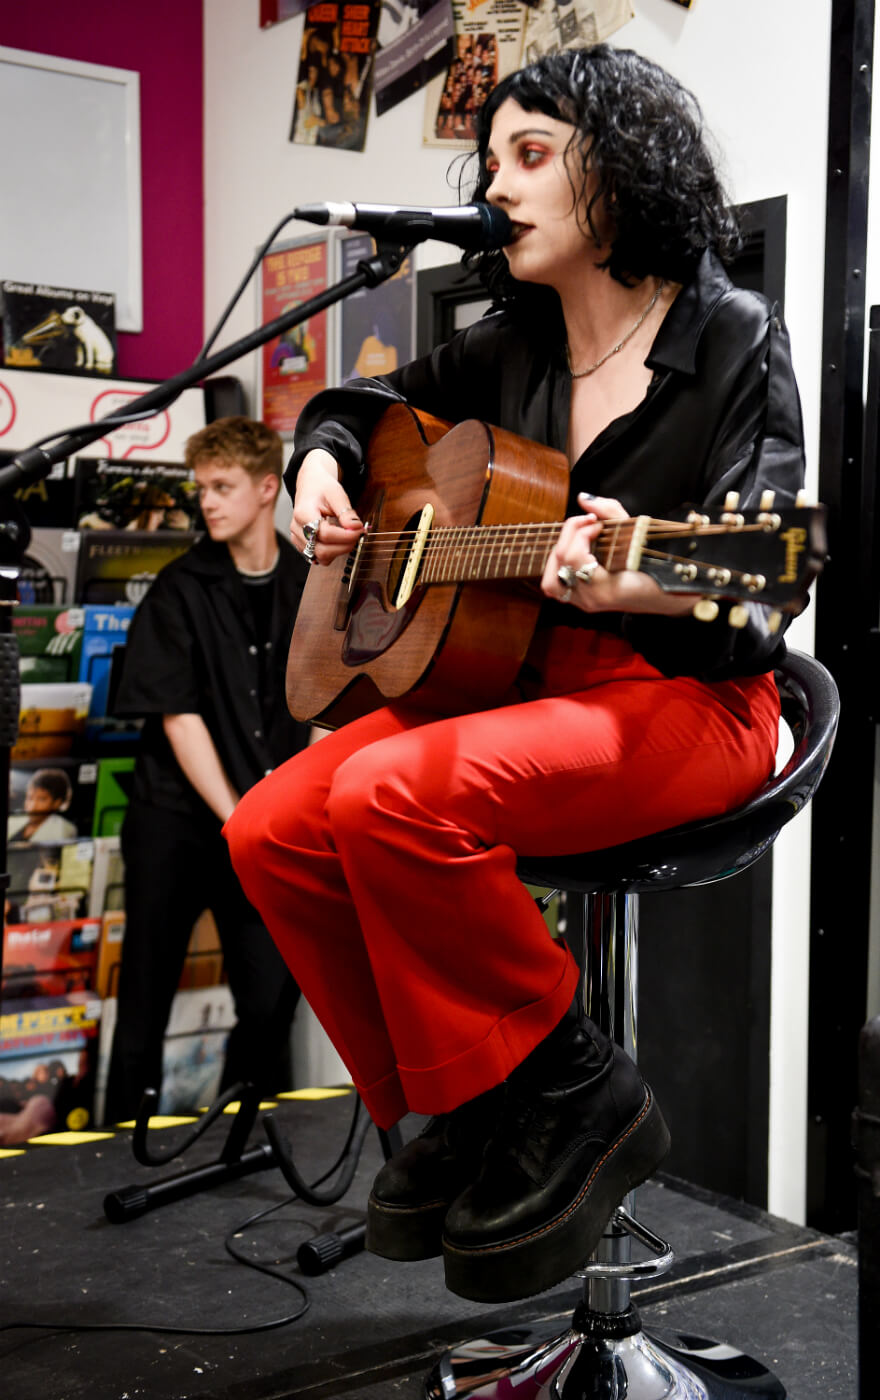 Manchester quartet Pale Waves signing copies of their new album My Mind Makes Noises and performing at HMV Manchester - image courtesy Shirlaine Forrest